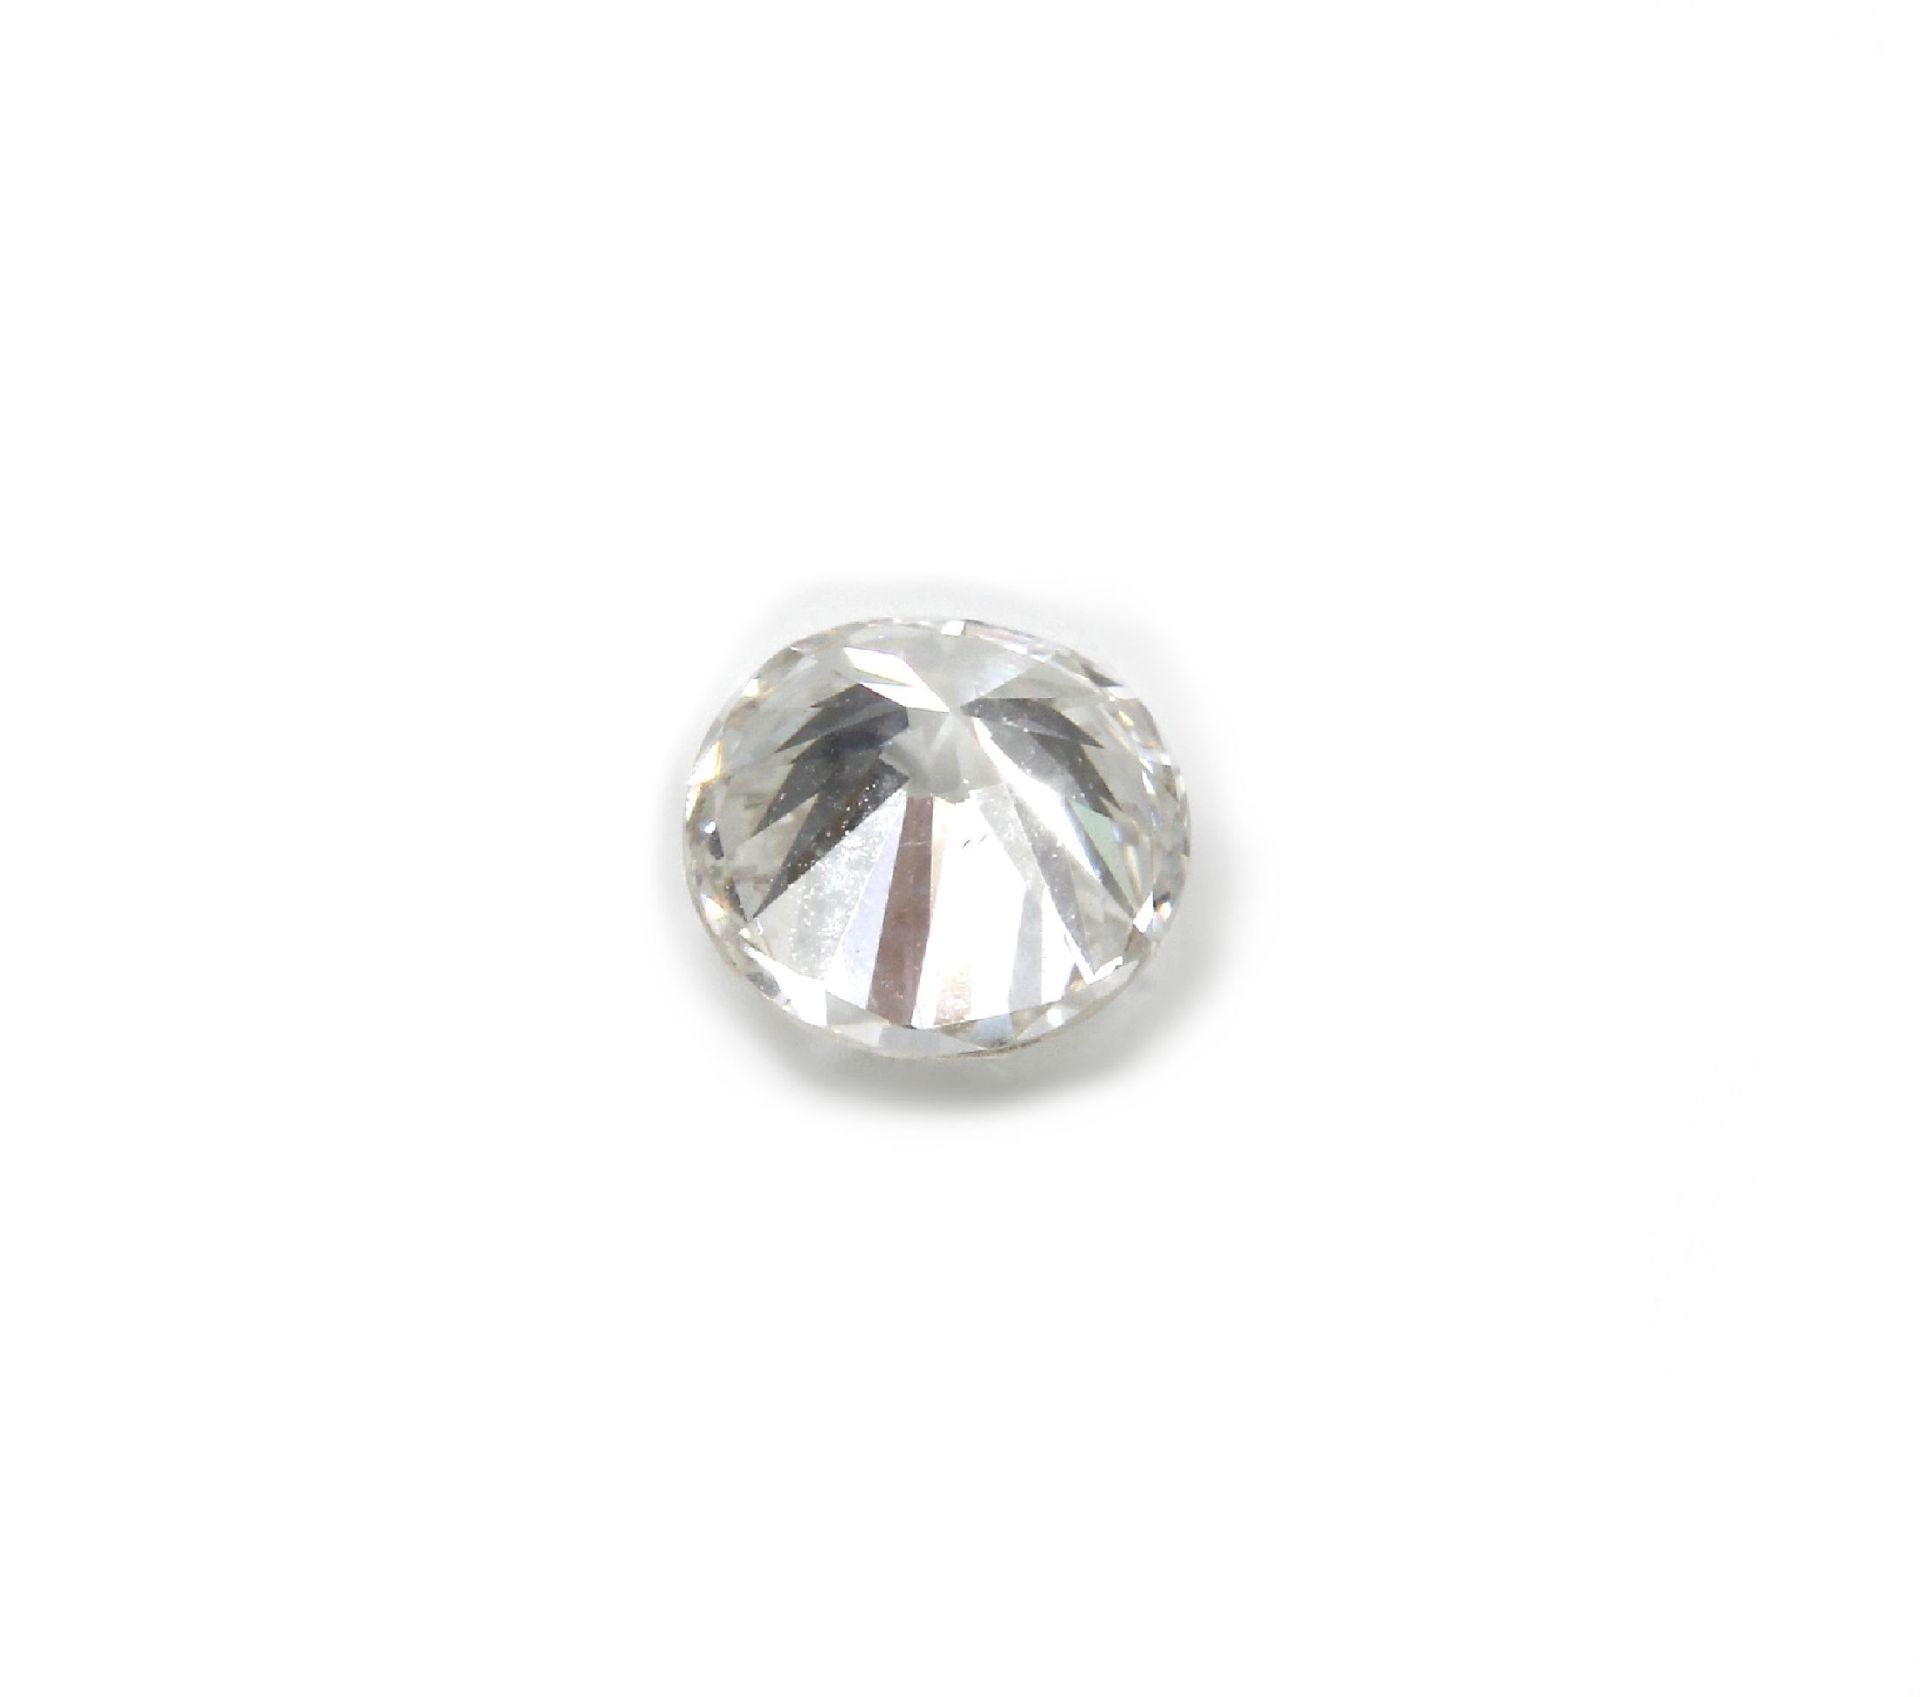 Loser Brillant, 0.64 ct Weiß(H)/si1, mit GIA-Expertise - Image 2 of 2